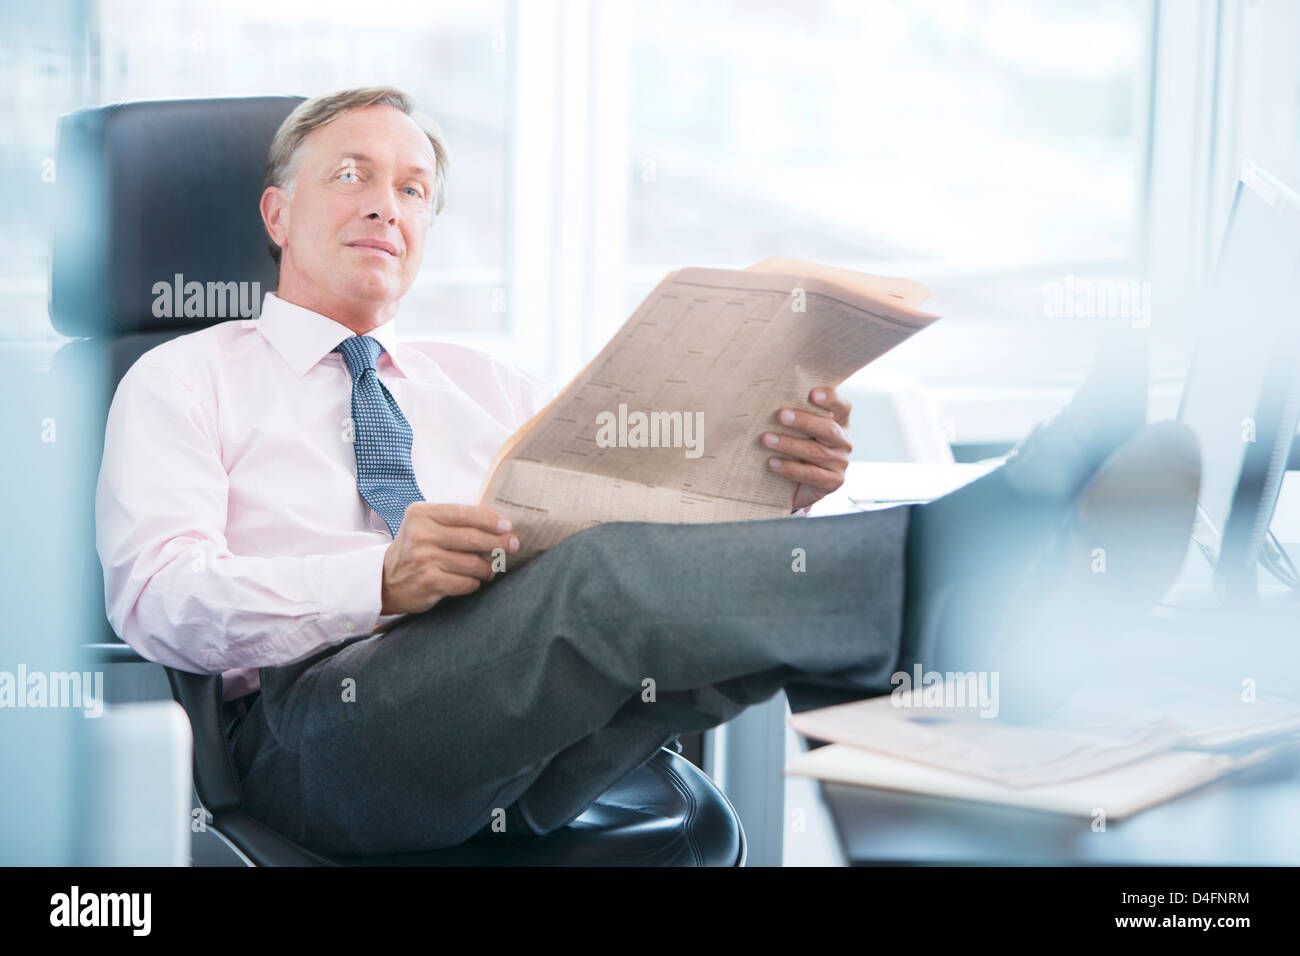 Businessman reading newspaper in office Banque D'Images